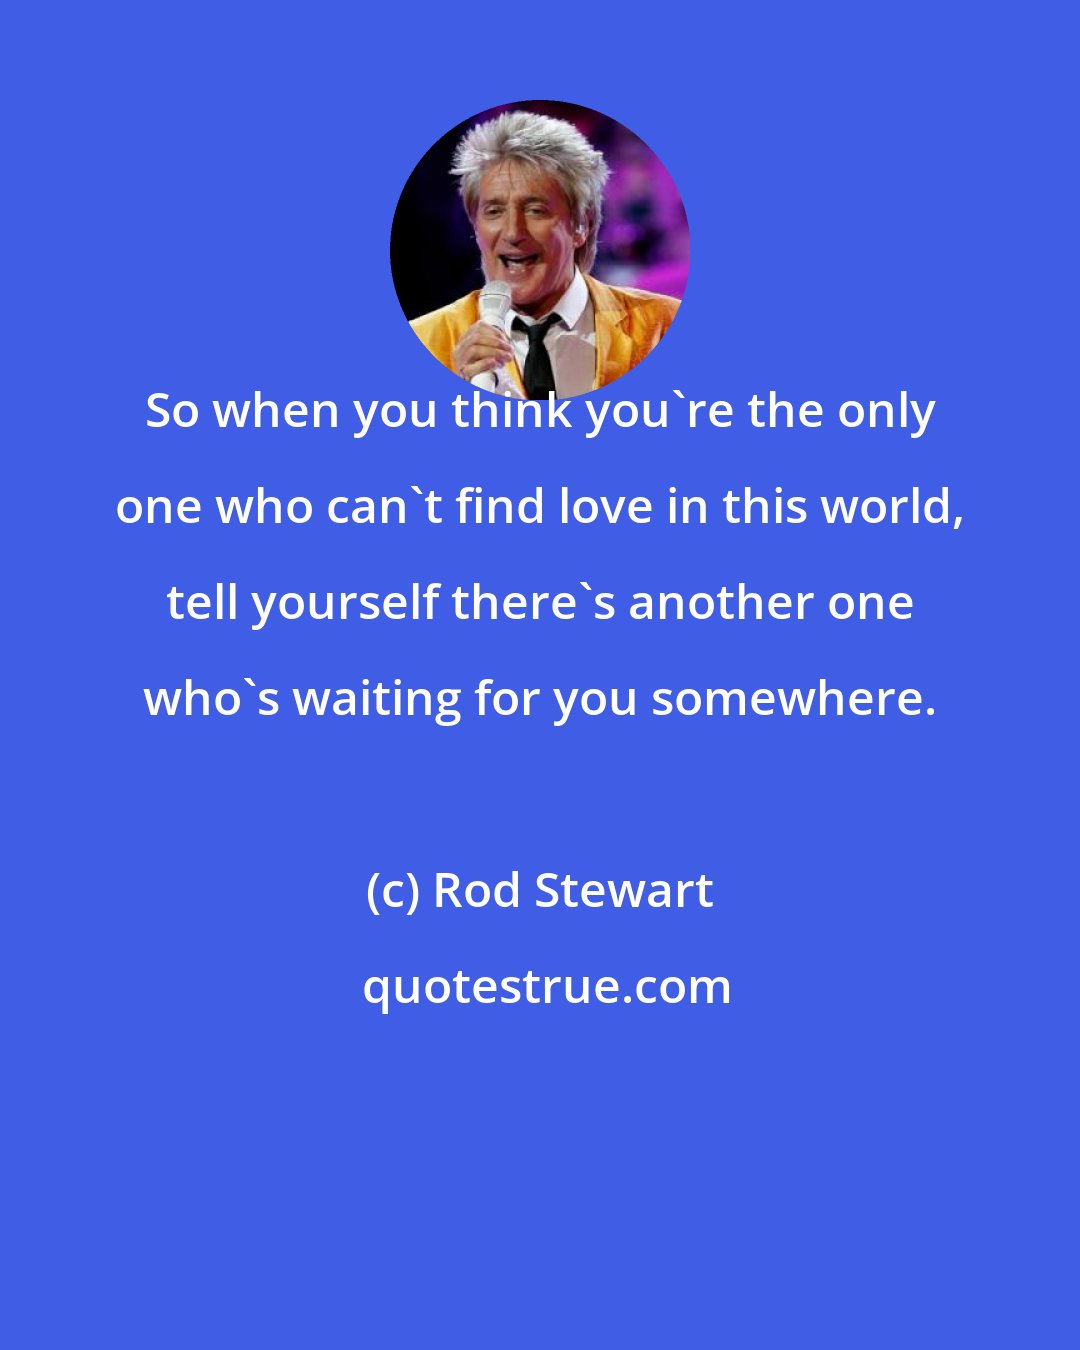 Rod Stewart: So when you think you're the only one who can't find love in this world, tell yourself there's another one who's waiting for you somewhere.